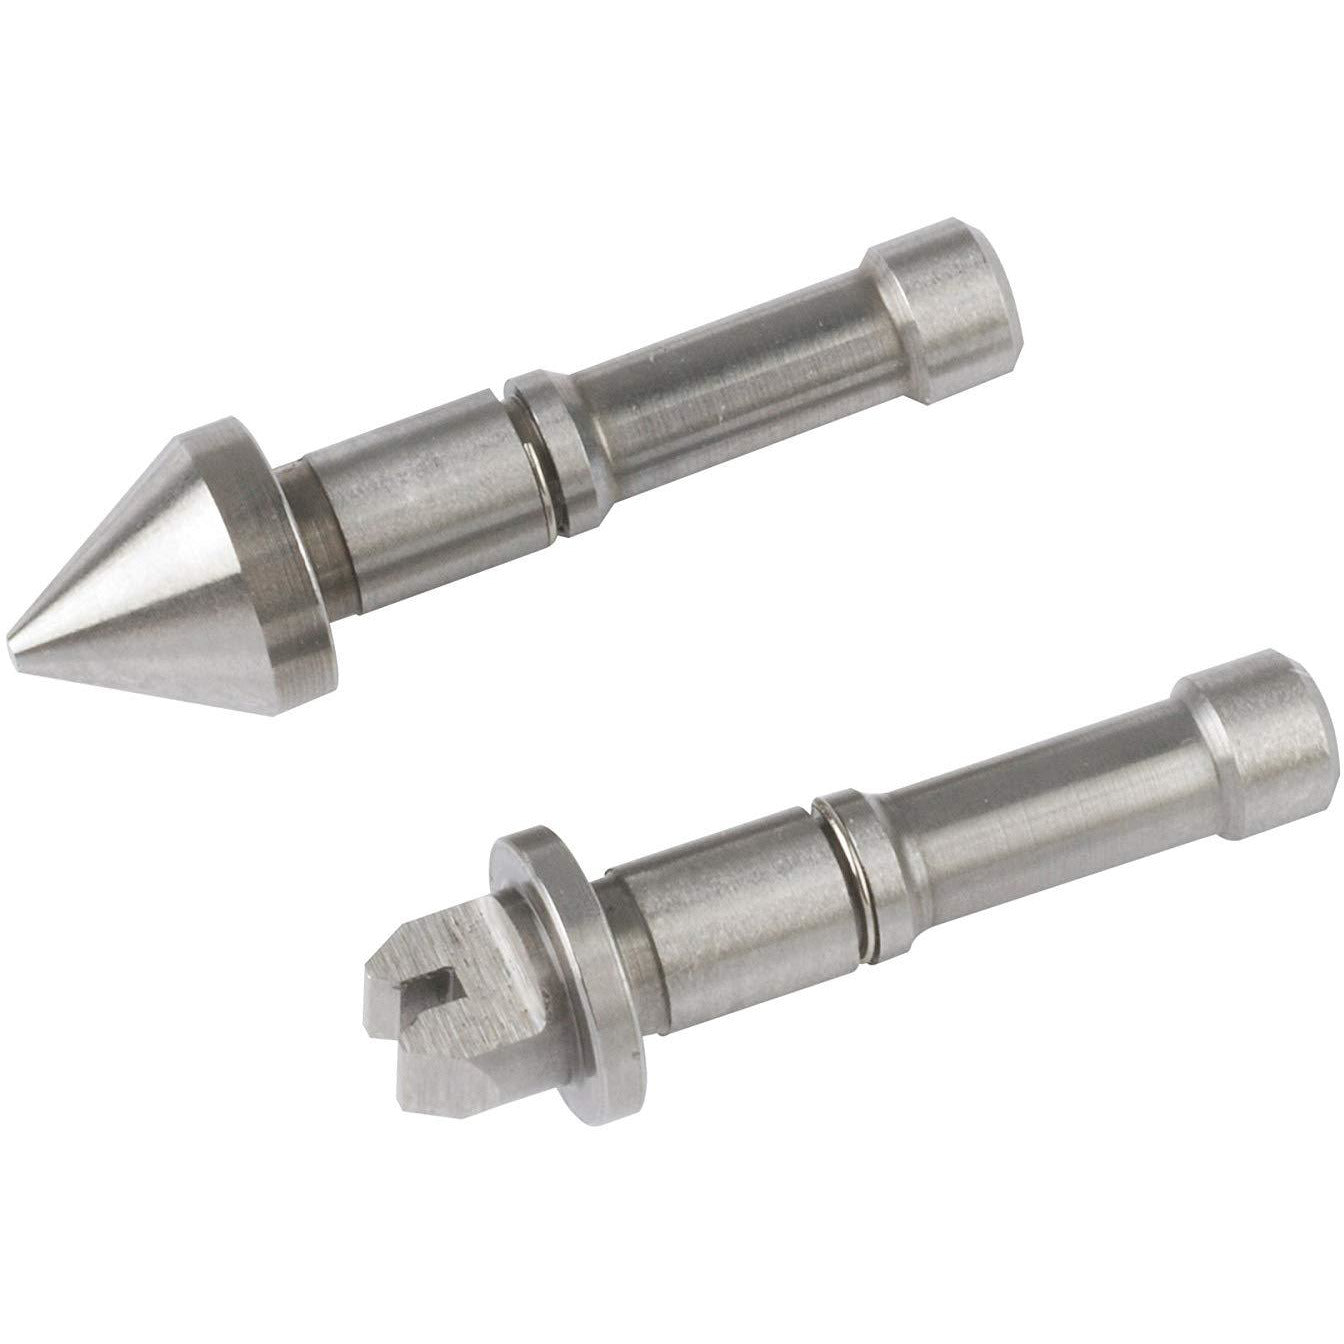 Mitutoyo Anvil and Spindle Tip 5.5-7mm/4.5-3TPI-Mitutoyo-Tool Factory